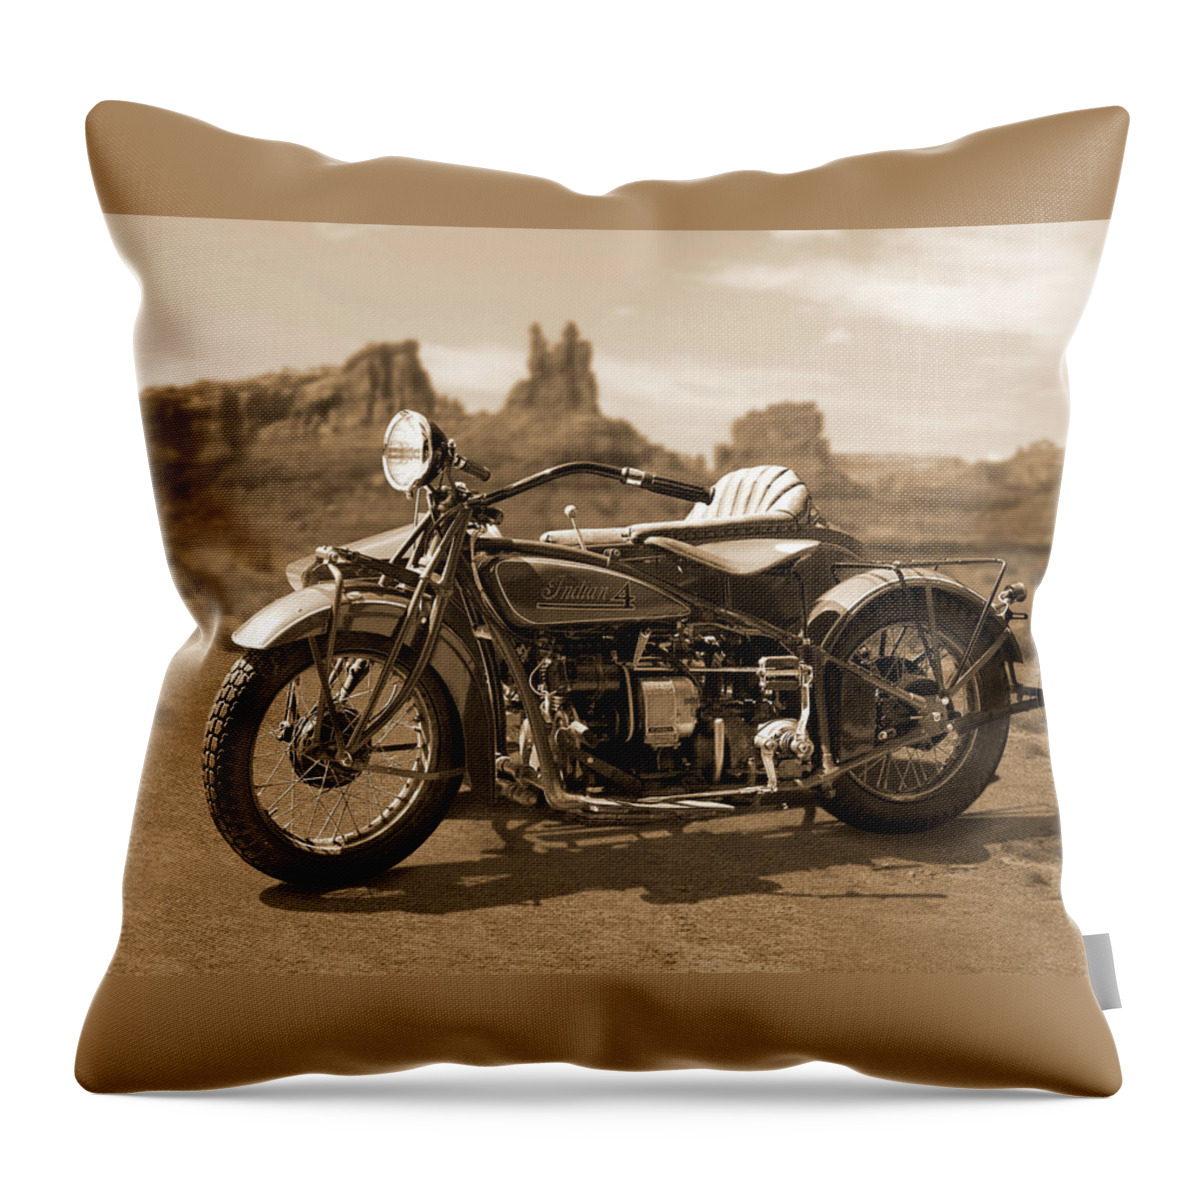 Indian Motorcycle Throw Pillow featuring the photograph Indian 4 Sidecar by Mike McGlothlen